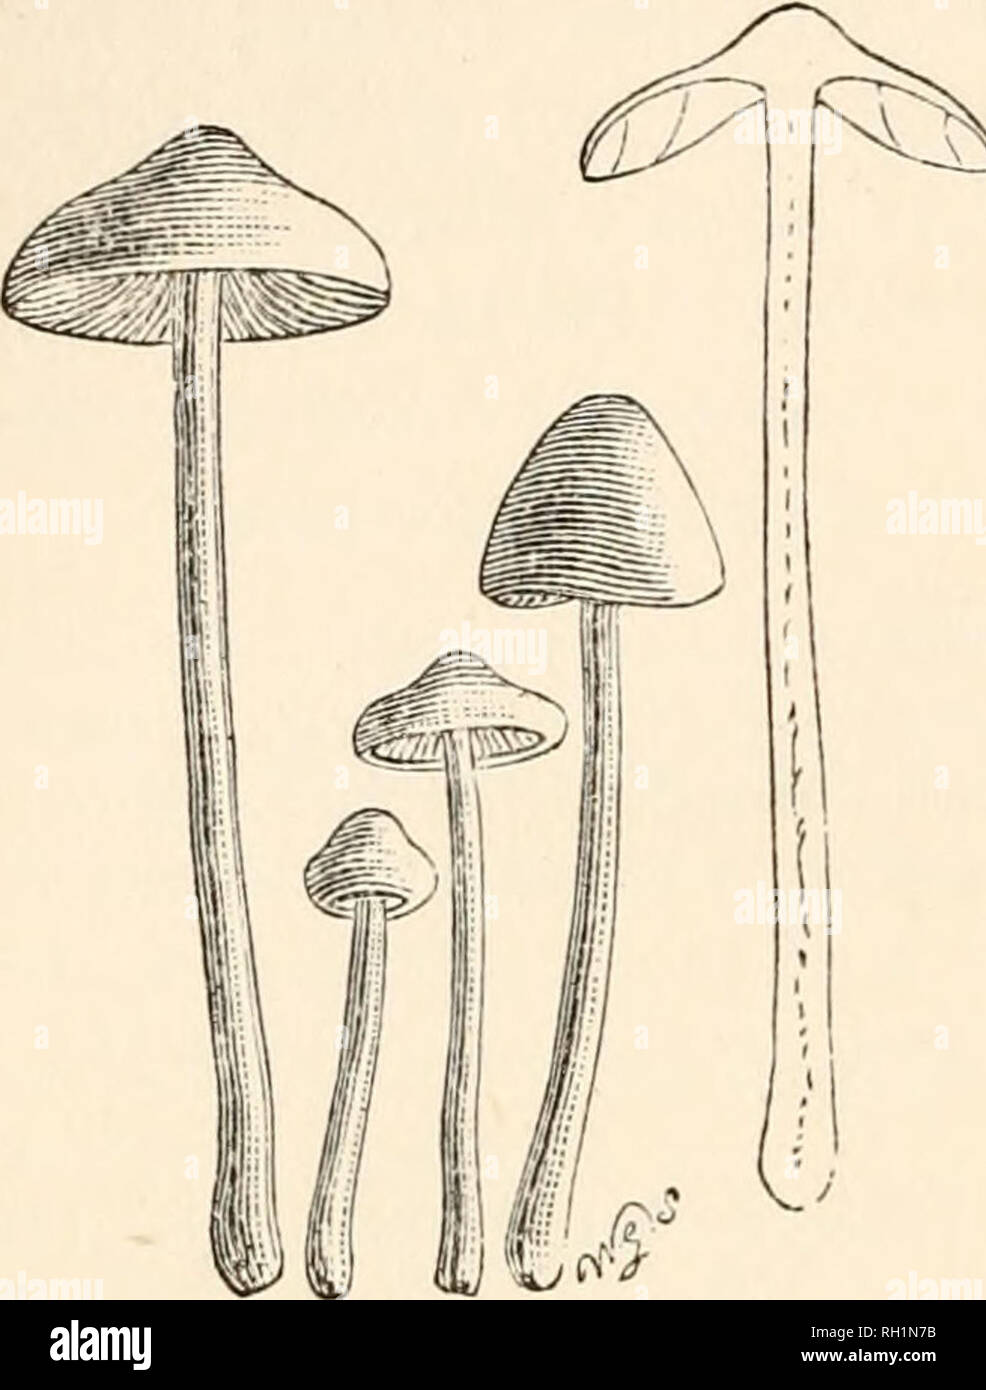 . British fungi (hymenomycetes). Basidiomycetes; Fungi -- Great Britain. 252 AGARICUS. Inocybe. Allied to A. sindonius. On the ground. Street, Somerset, 1871. Oct. Name— after J. A. Clark. B. &amp; Br. n. 1345. C. Illust. PL 429. B. 561. A. geophyllus Sow. — Pileus 12 mm. (% in.) and more high and broad, normally while, somewhat fleshy, conical then expanded, umbonate, dry, becoming silky- even, then covered with longitudinal fibrils from the cuticle gaping open ; flesh white. Stem 5-7.5 cent. (2-3 in.) long, 2-4 more rarely 6 mm. (1-2, 3 lin.) thick, stuffed, slightly firm, equal, commonly te Stock Photo